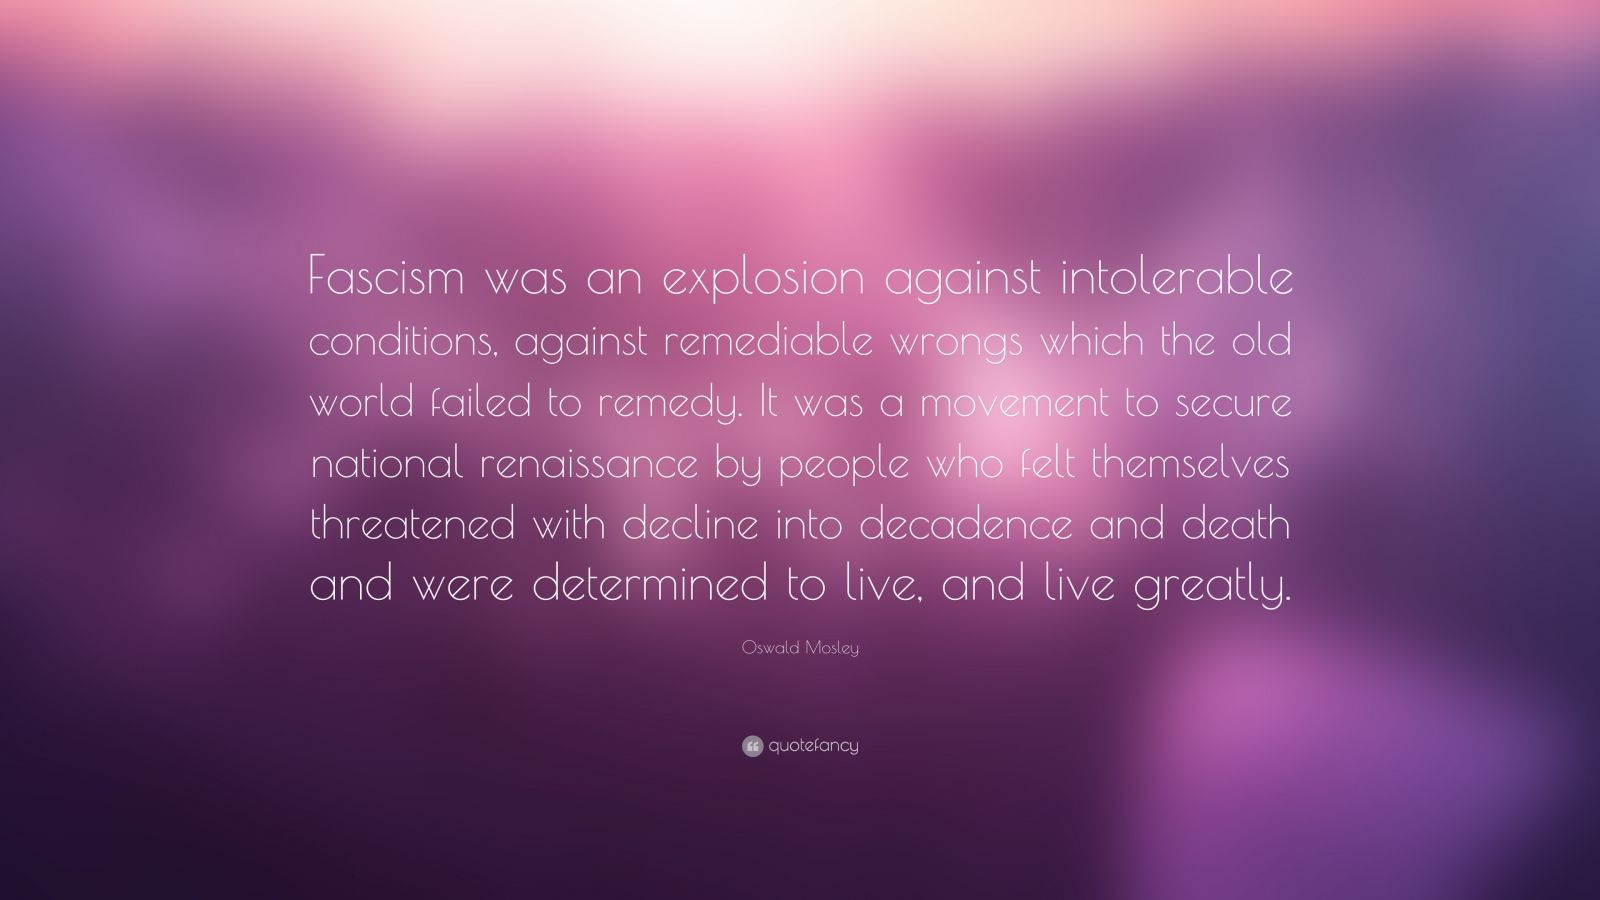 Oswald Mosley Quote: “Fascism was an explosion against intolerable